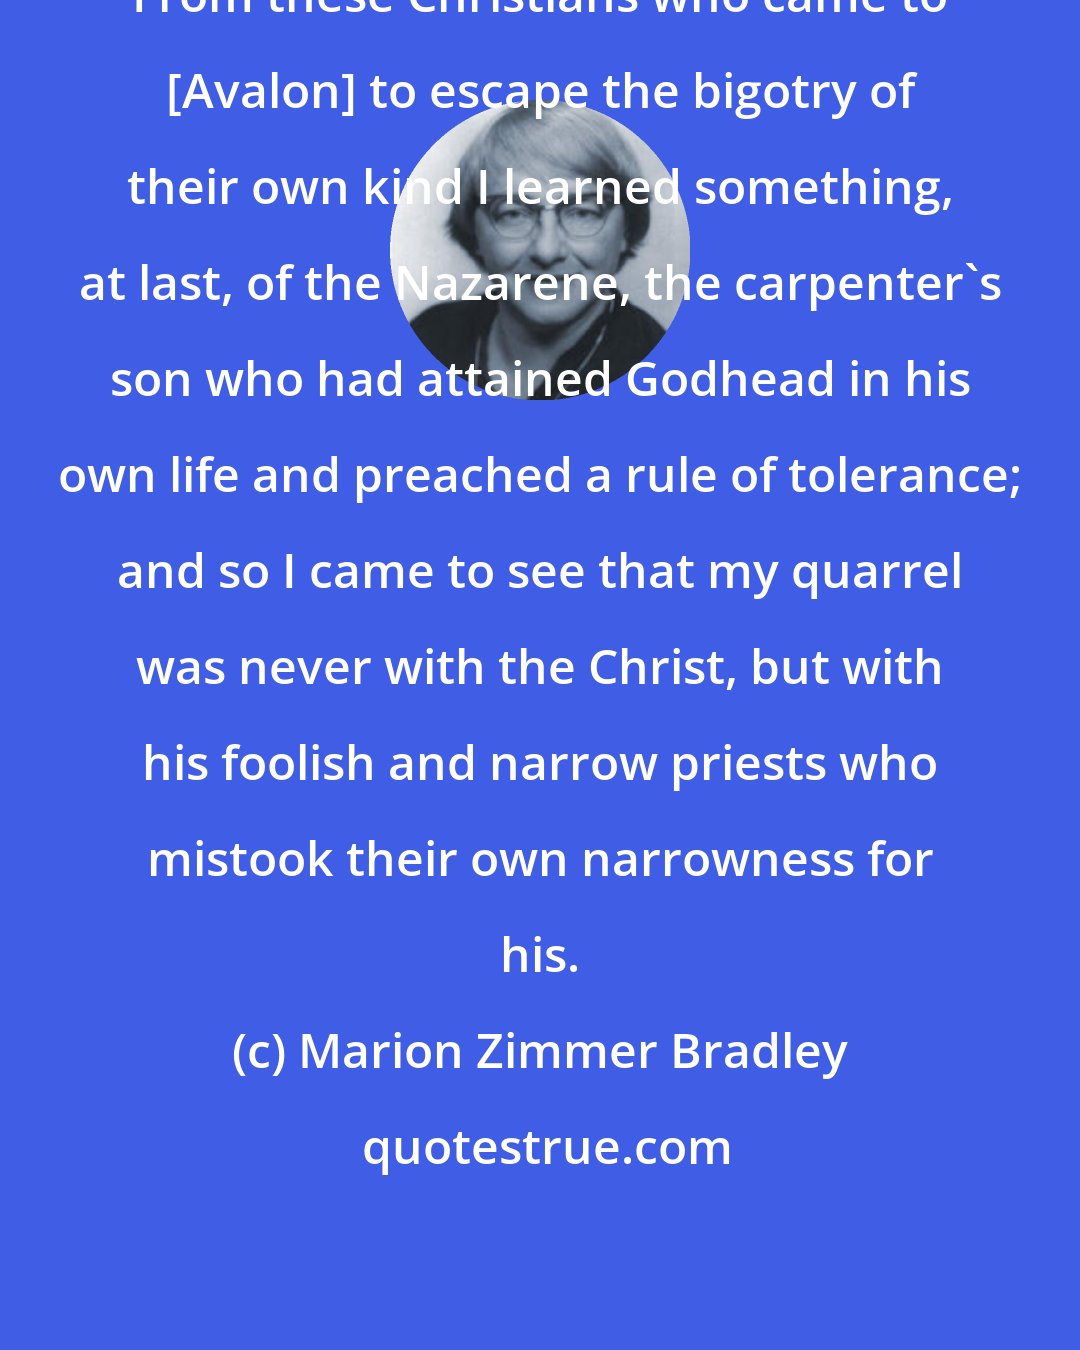 Marion Zimmer Bradley: From these Christians who came to [Avalon] to escape the bigotry of their own kind I learned something, at last, of the Nazarene, the carpenter's son who had attained Godhead in his own life and preached a rule of tolerance; and so I came to see that my quarrel was never with the Christ, but with his foolish and narrow priests who mistook their own narrowness for his.